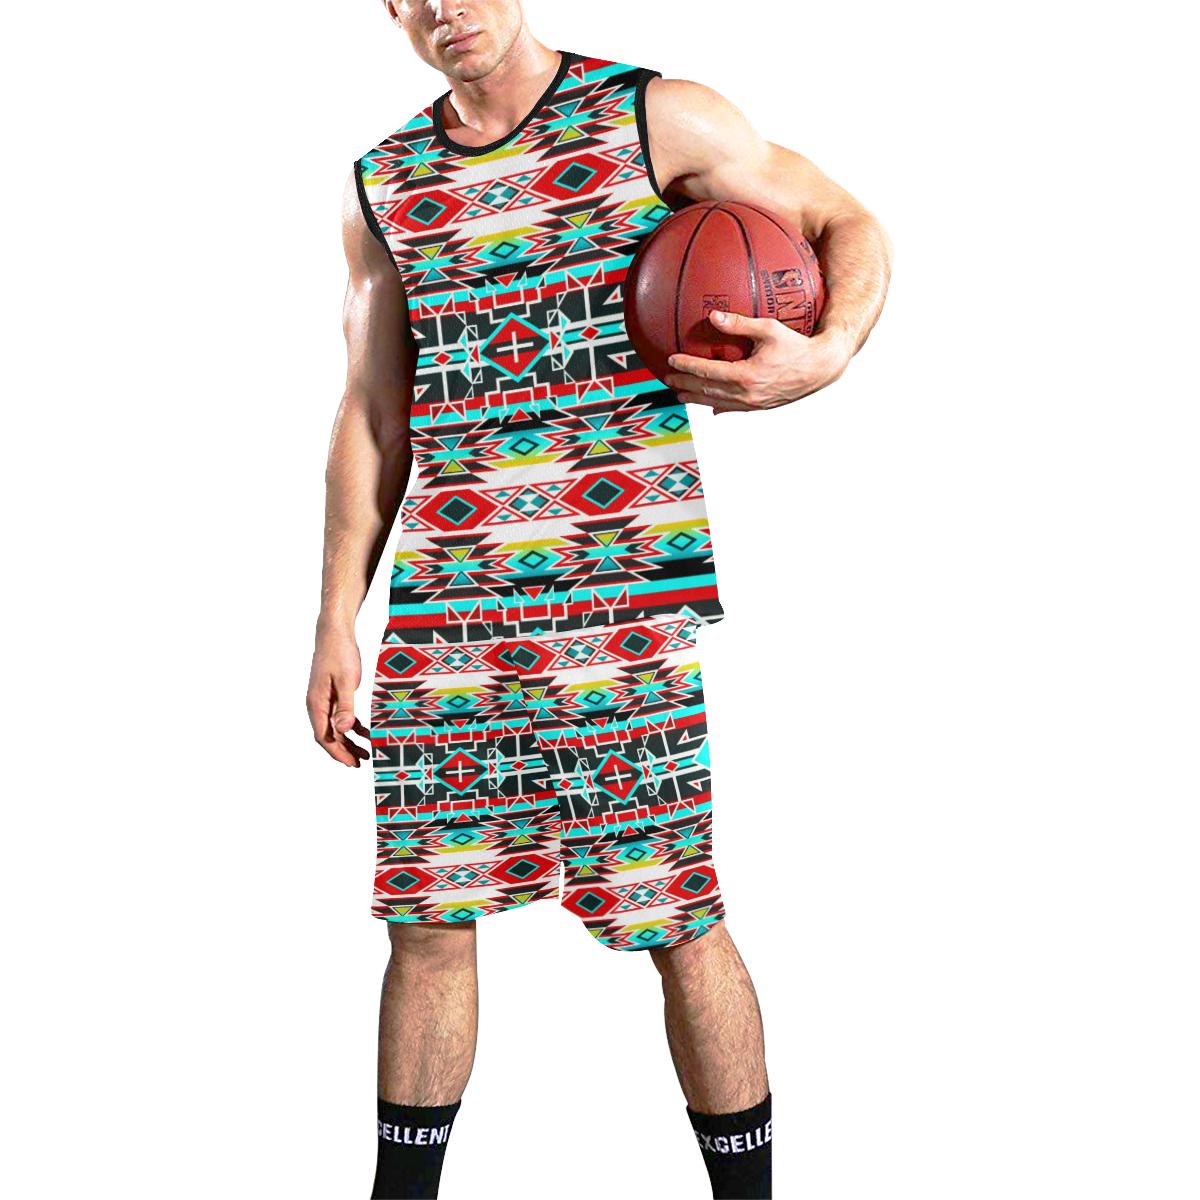 Force of Nature Windstorm All Over Print Basketball Uniform Basketball Uniform e-joyer 